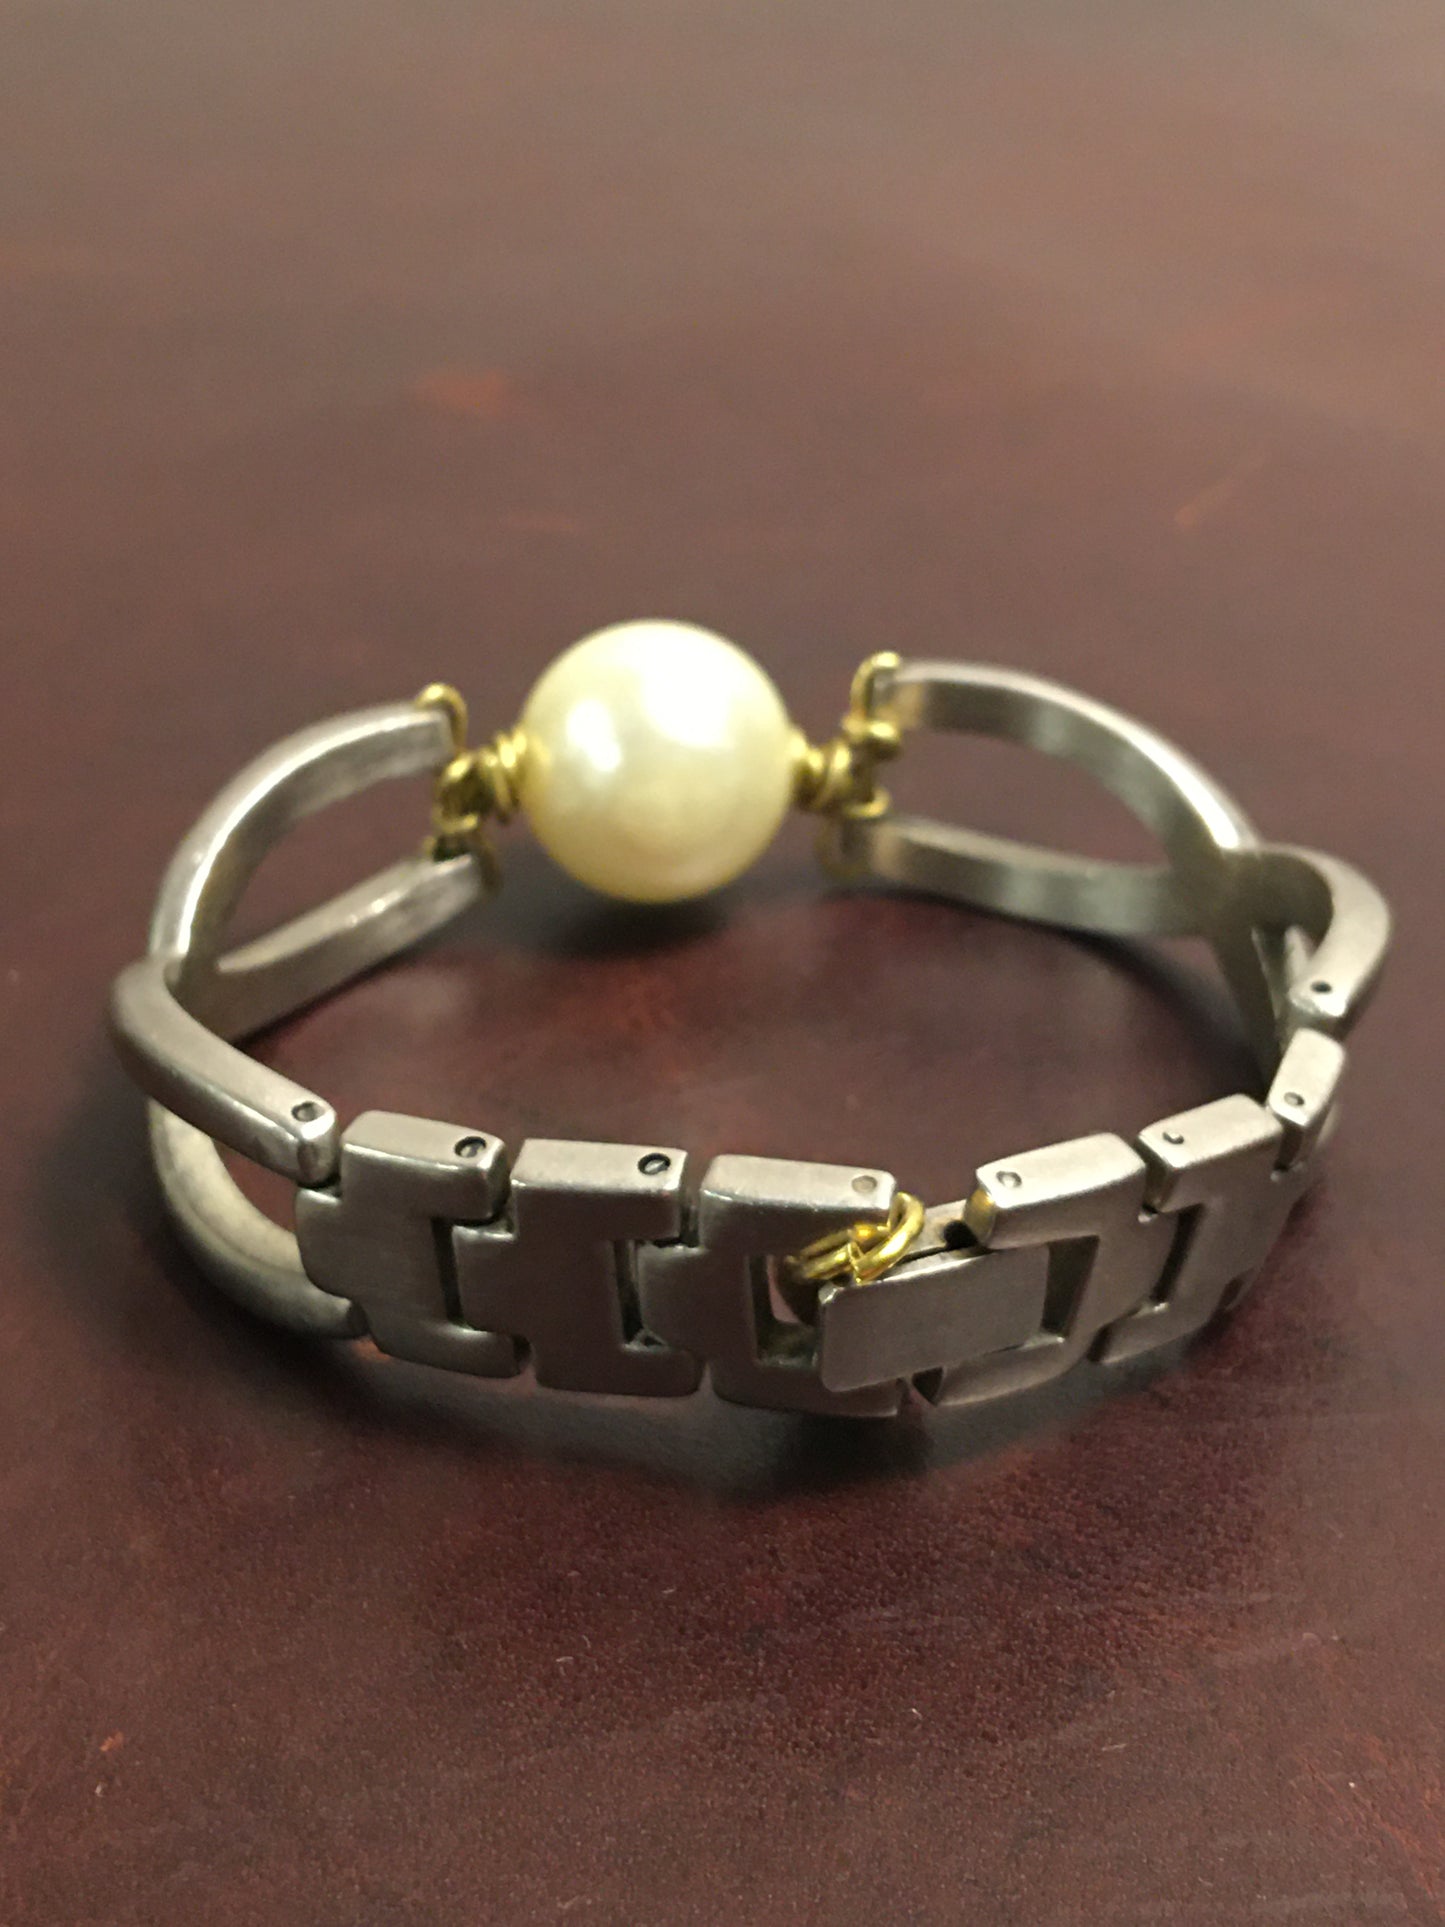 LS Upcycled Vintage Watch Chain & Pearl Bracelet